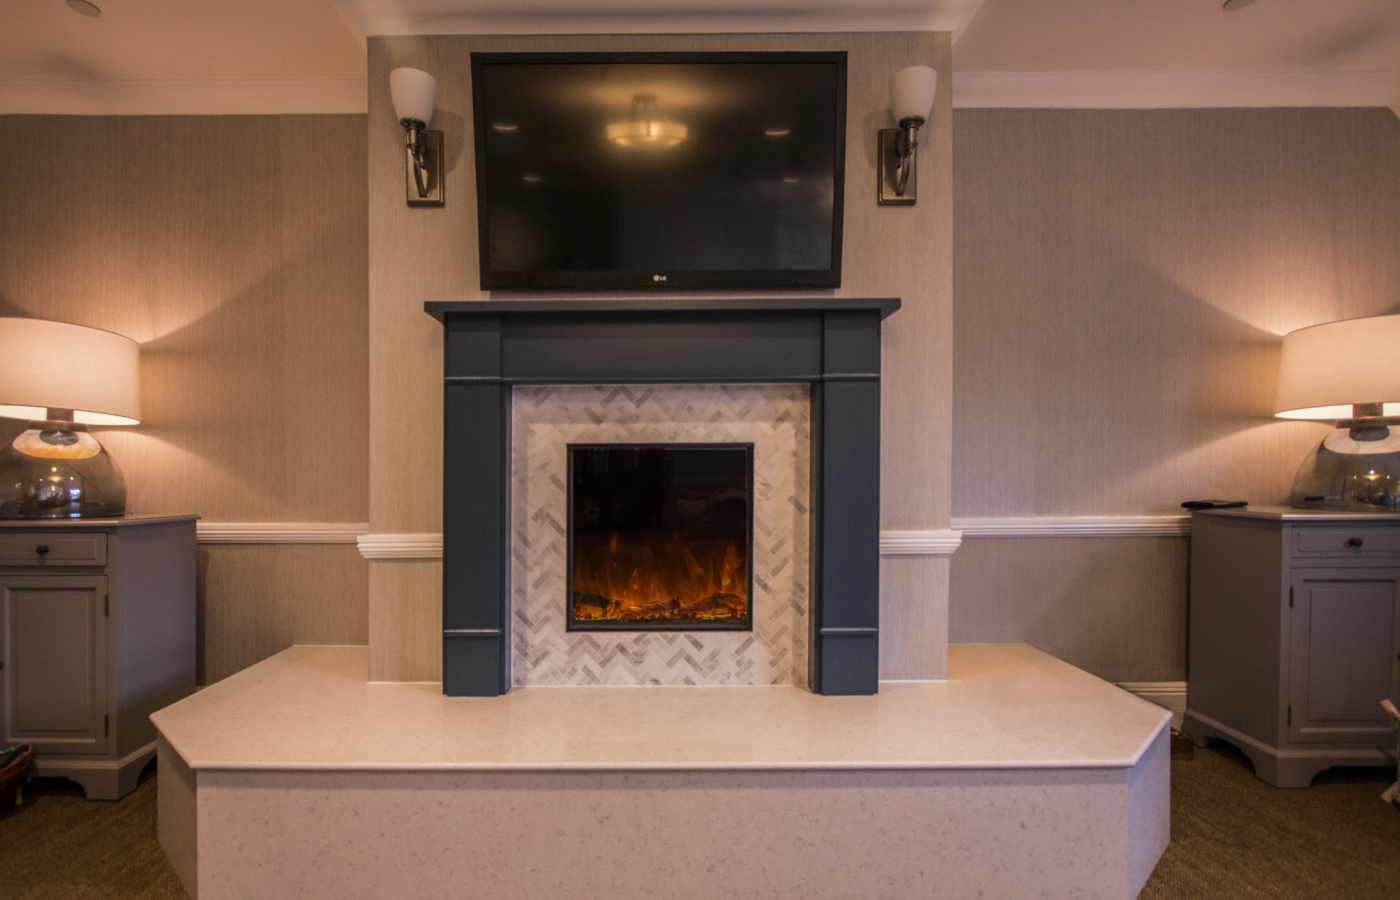 Fireplace from care home interior refurbishment